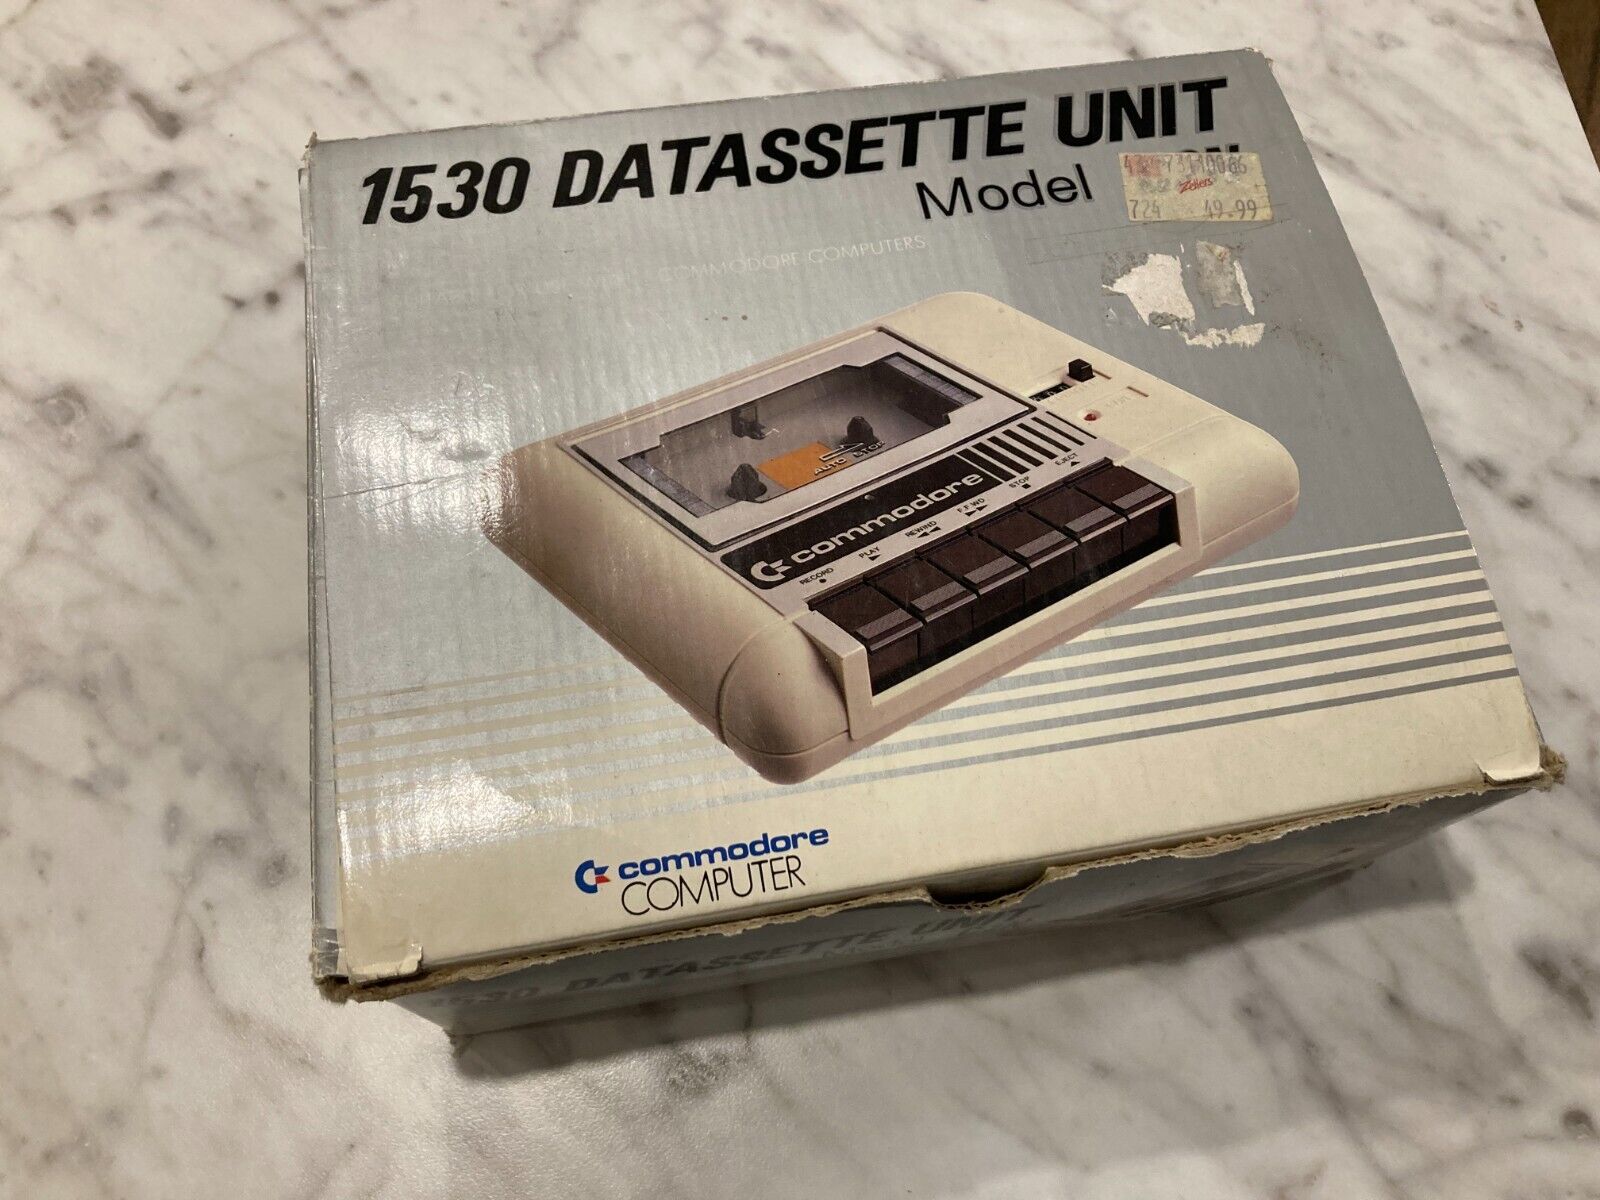 Commodore 1530  Datasette Unit With in Original Box with Manual